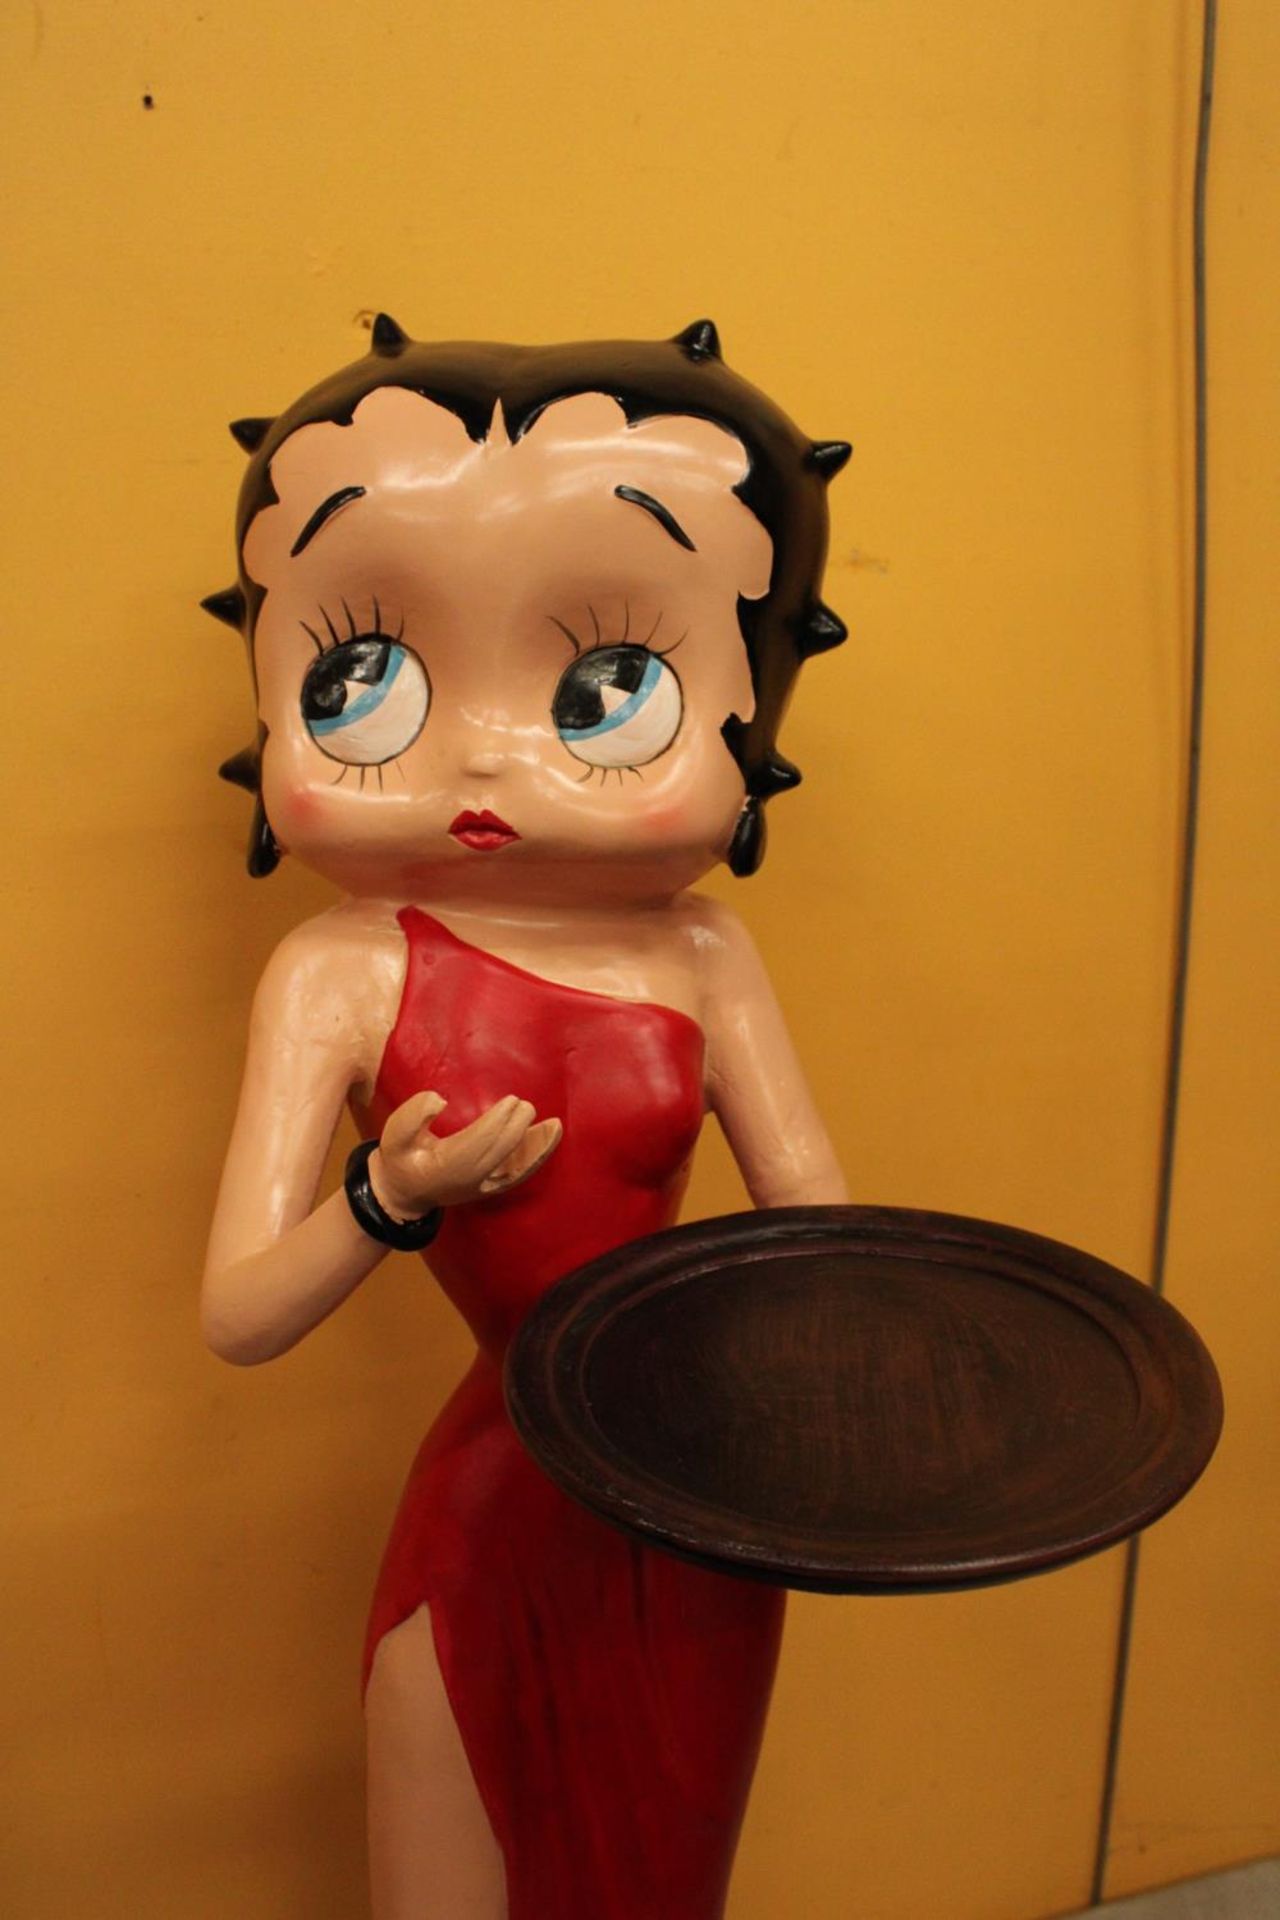 A DUMB WAITER IN THE STYLE OF A BETTY BOO WAITRESS FIGURE - Image 2 of 5